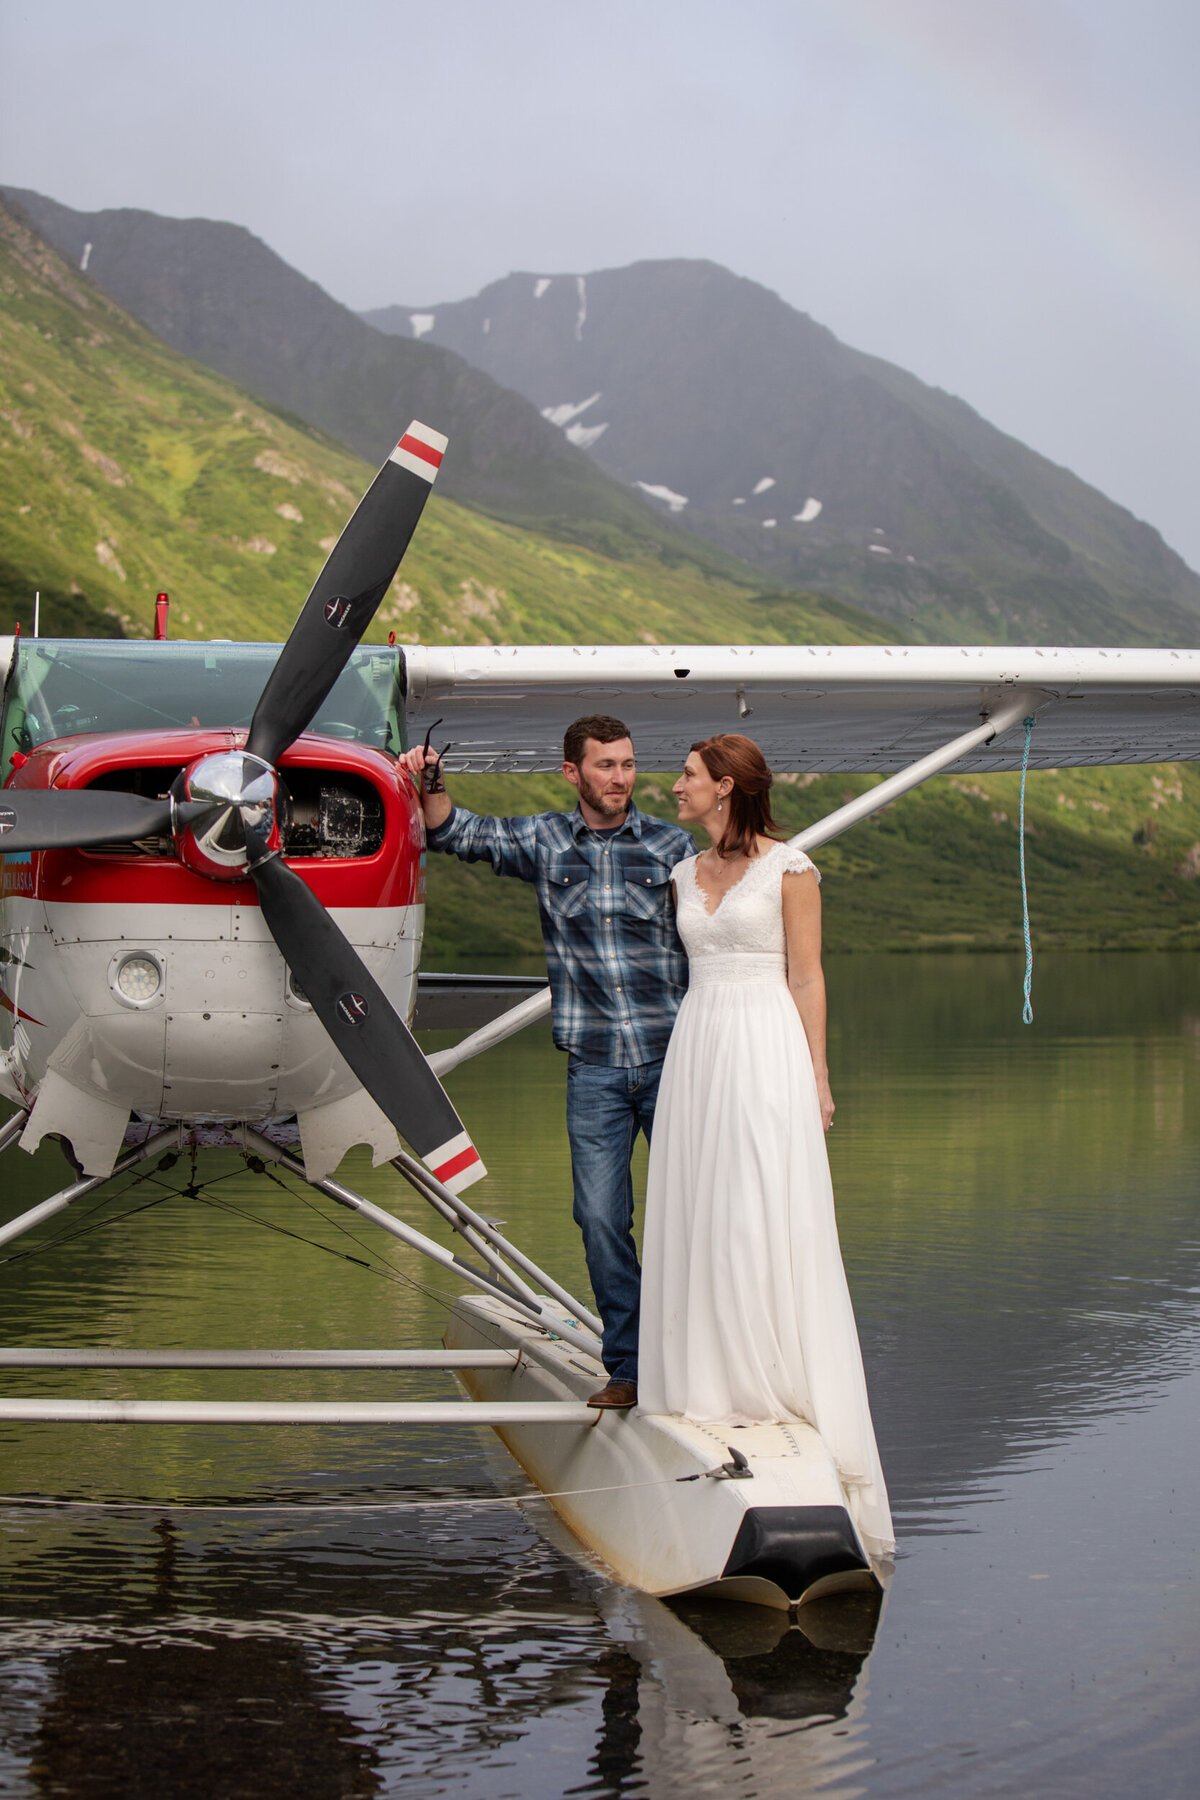 A bride and groom stand on one side of a float plane in Alaska on their wedding day.